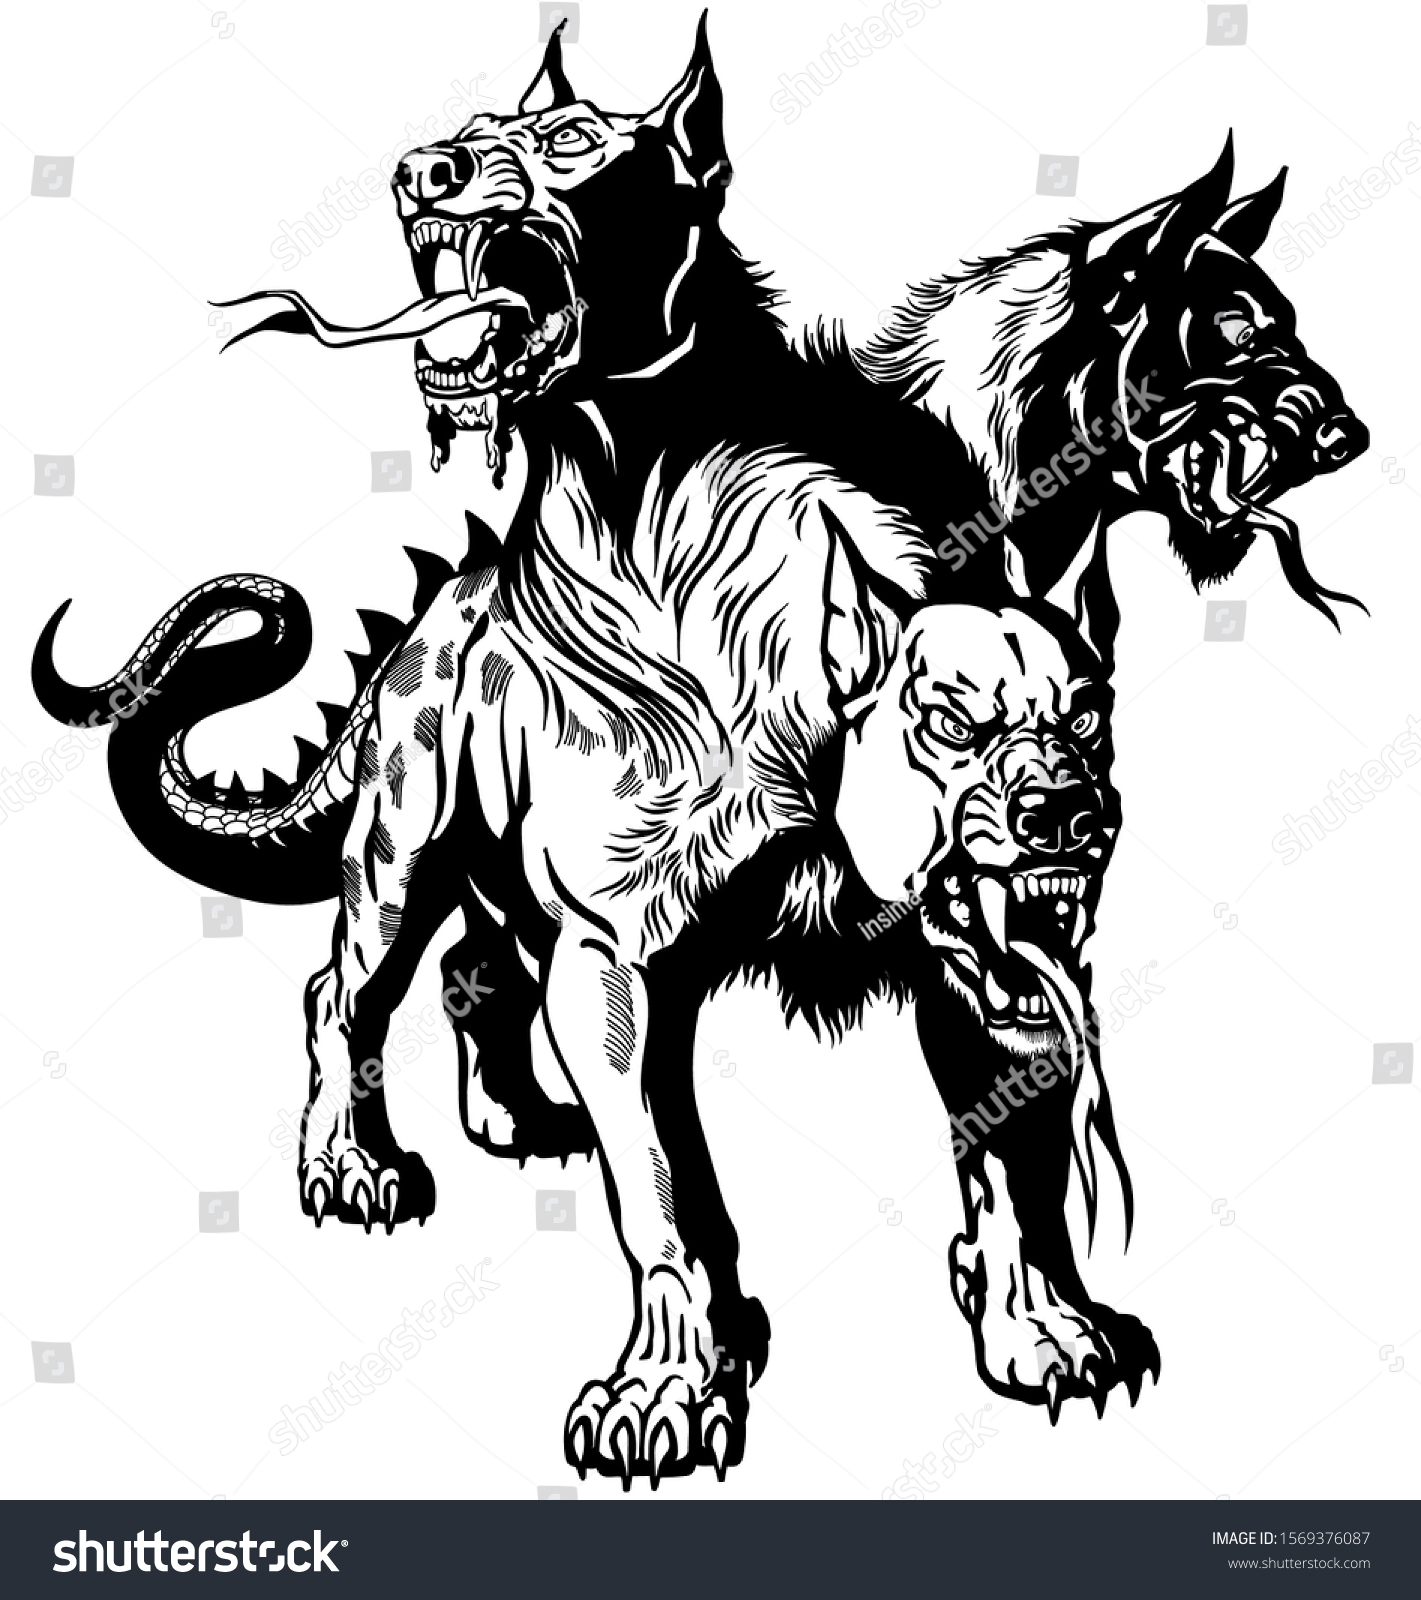 SVG of Cerberus hellhound Mythological three headed dog the guard of entrance to hell. Hound of Hades. Isolated tattoo style black and white vector illustration svg